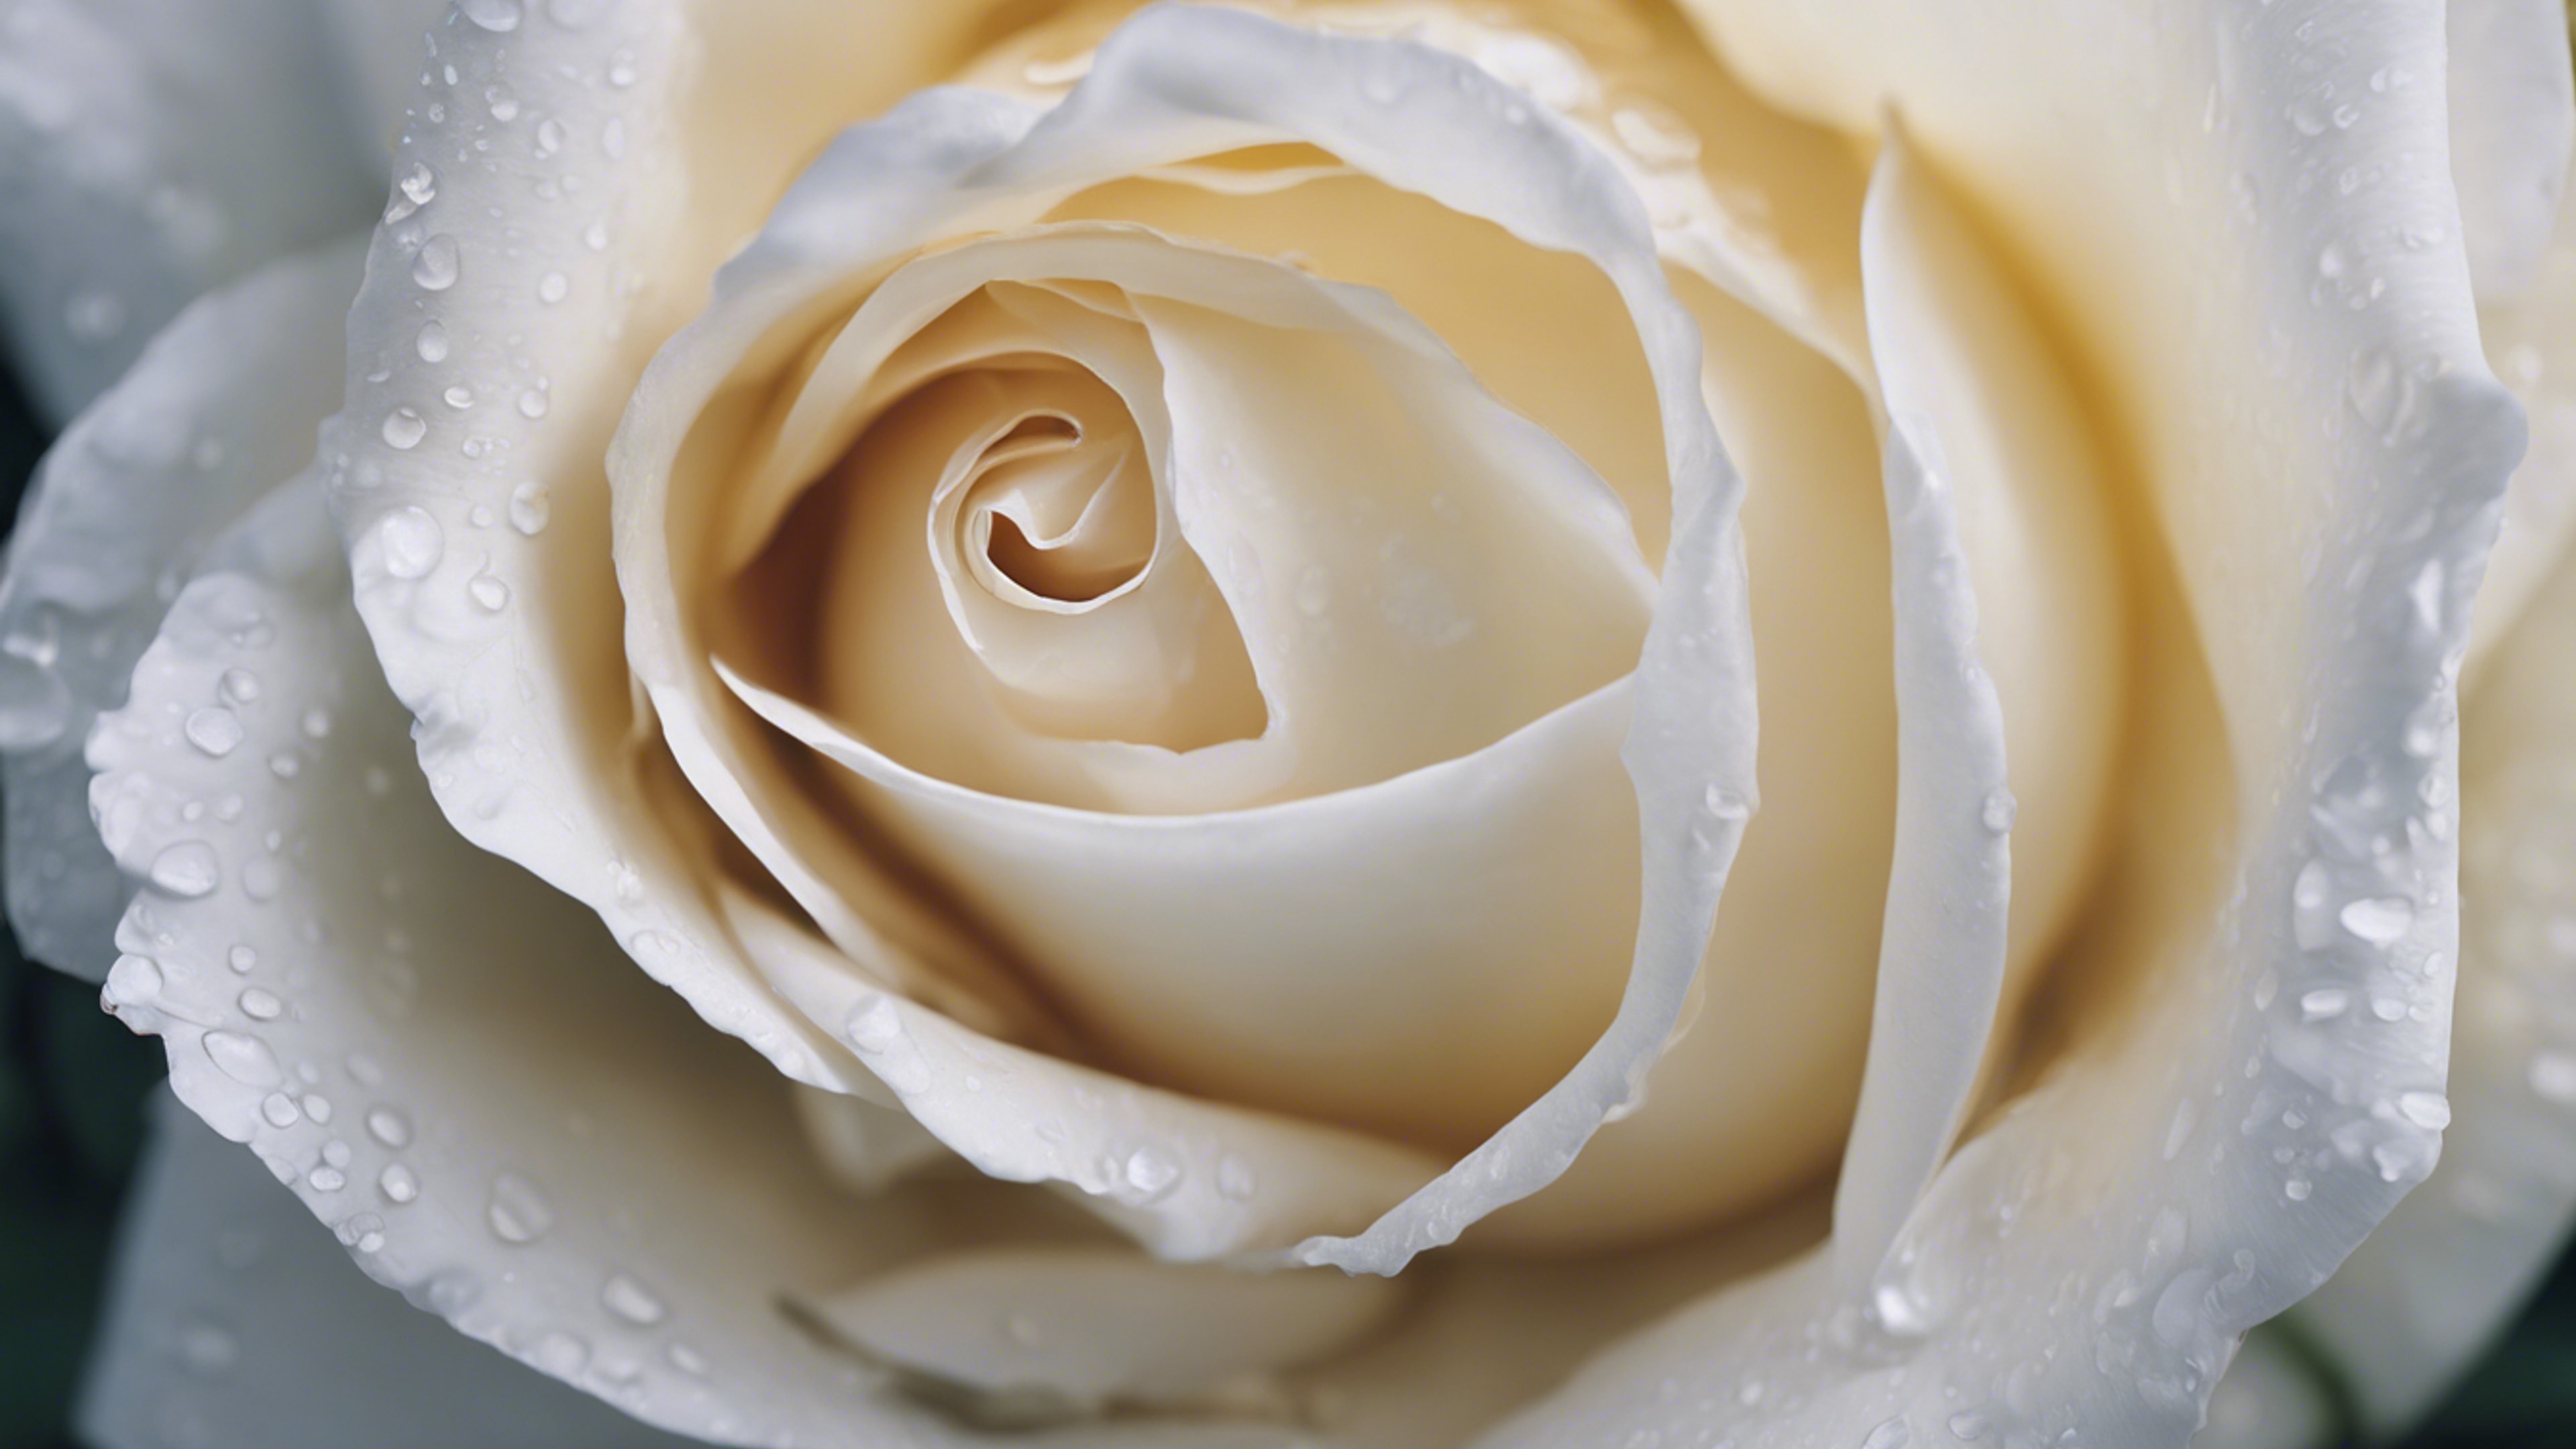 Zoomed view of the velvety petals of a white rose.壁紙[9ebd1bf4e1a74c36ba13]